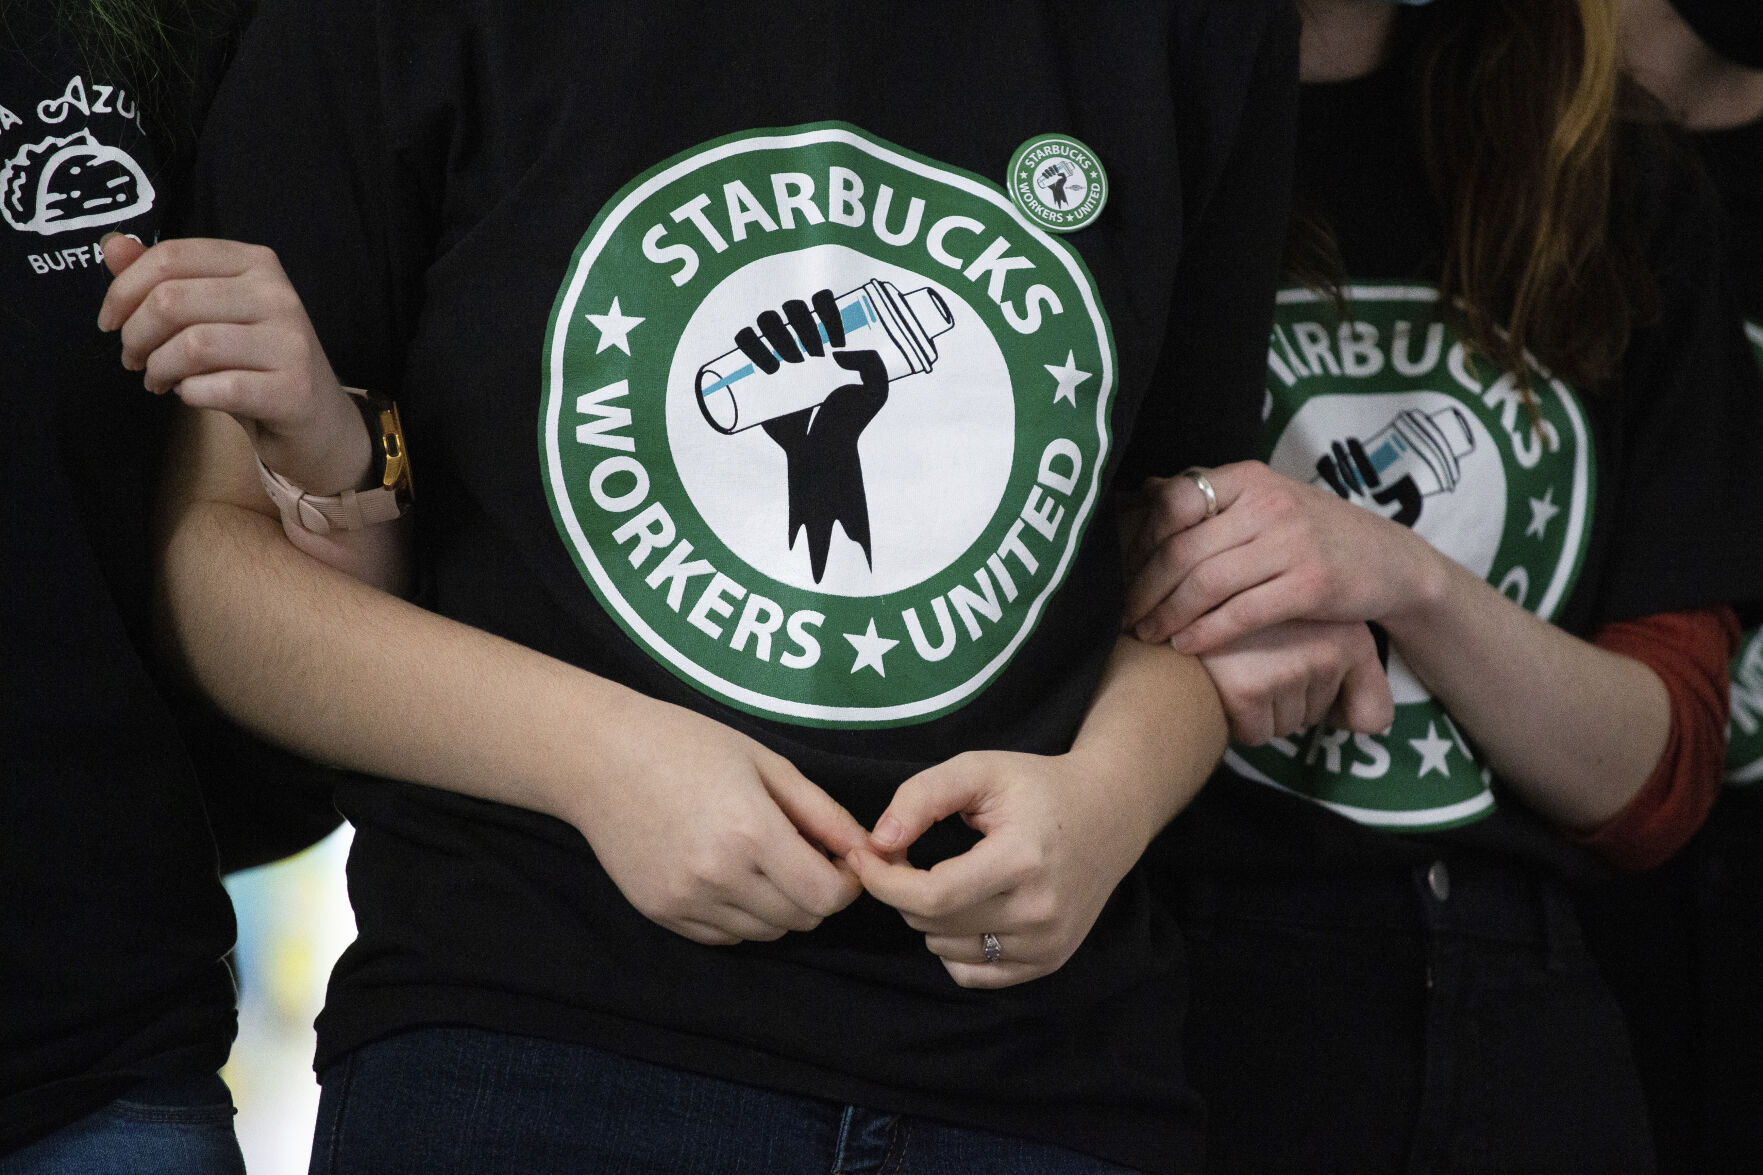 <p>FILE - Starbucks employees and supporters link arms during a union election watch party Dec. 9, 2021, in Buffalo, N.Y. The U.S. Supreme Court is set to hear oral arguments in a case filed by Starbucks against the National Labor Relations Board. (AP Photo/Joshua Bessex, File)</p>   PHOTO CREDIT: Joshua Bessex